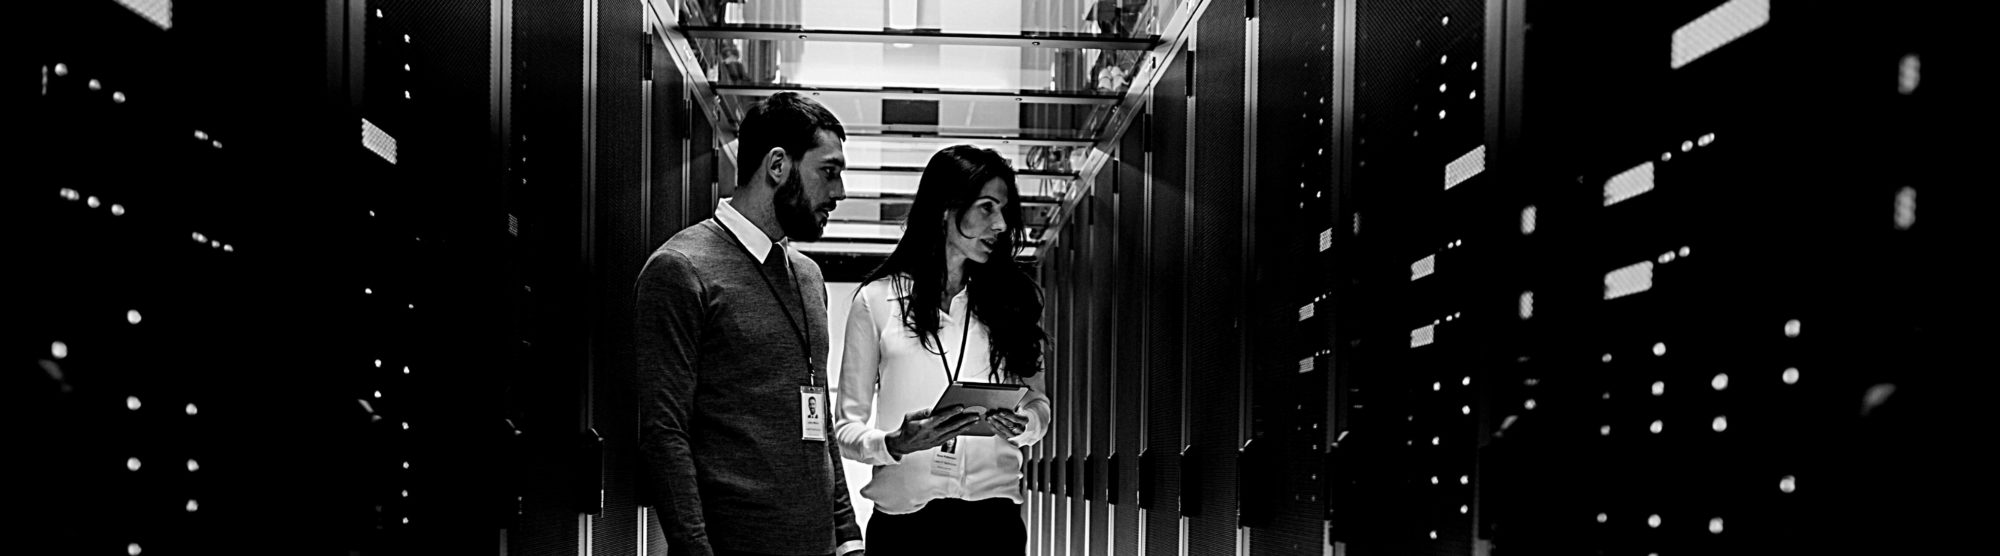 image of two professional workers, a man and woman, standing in front of data center cabinents with clipboards